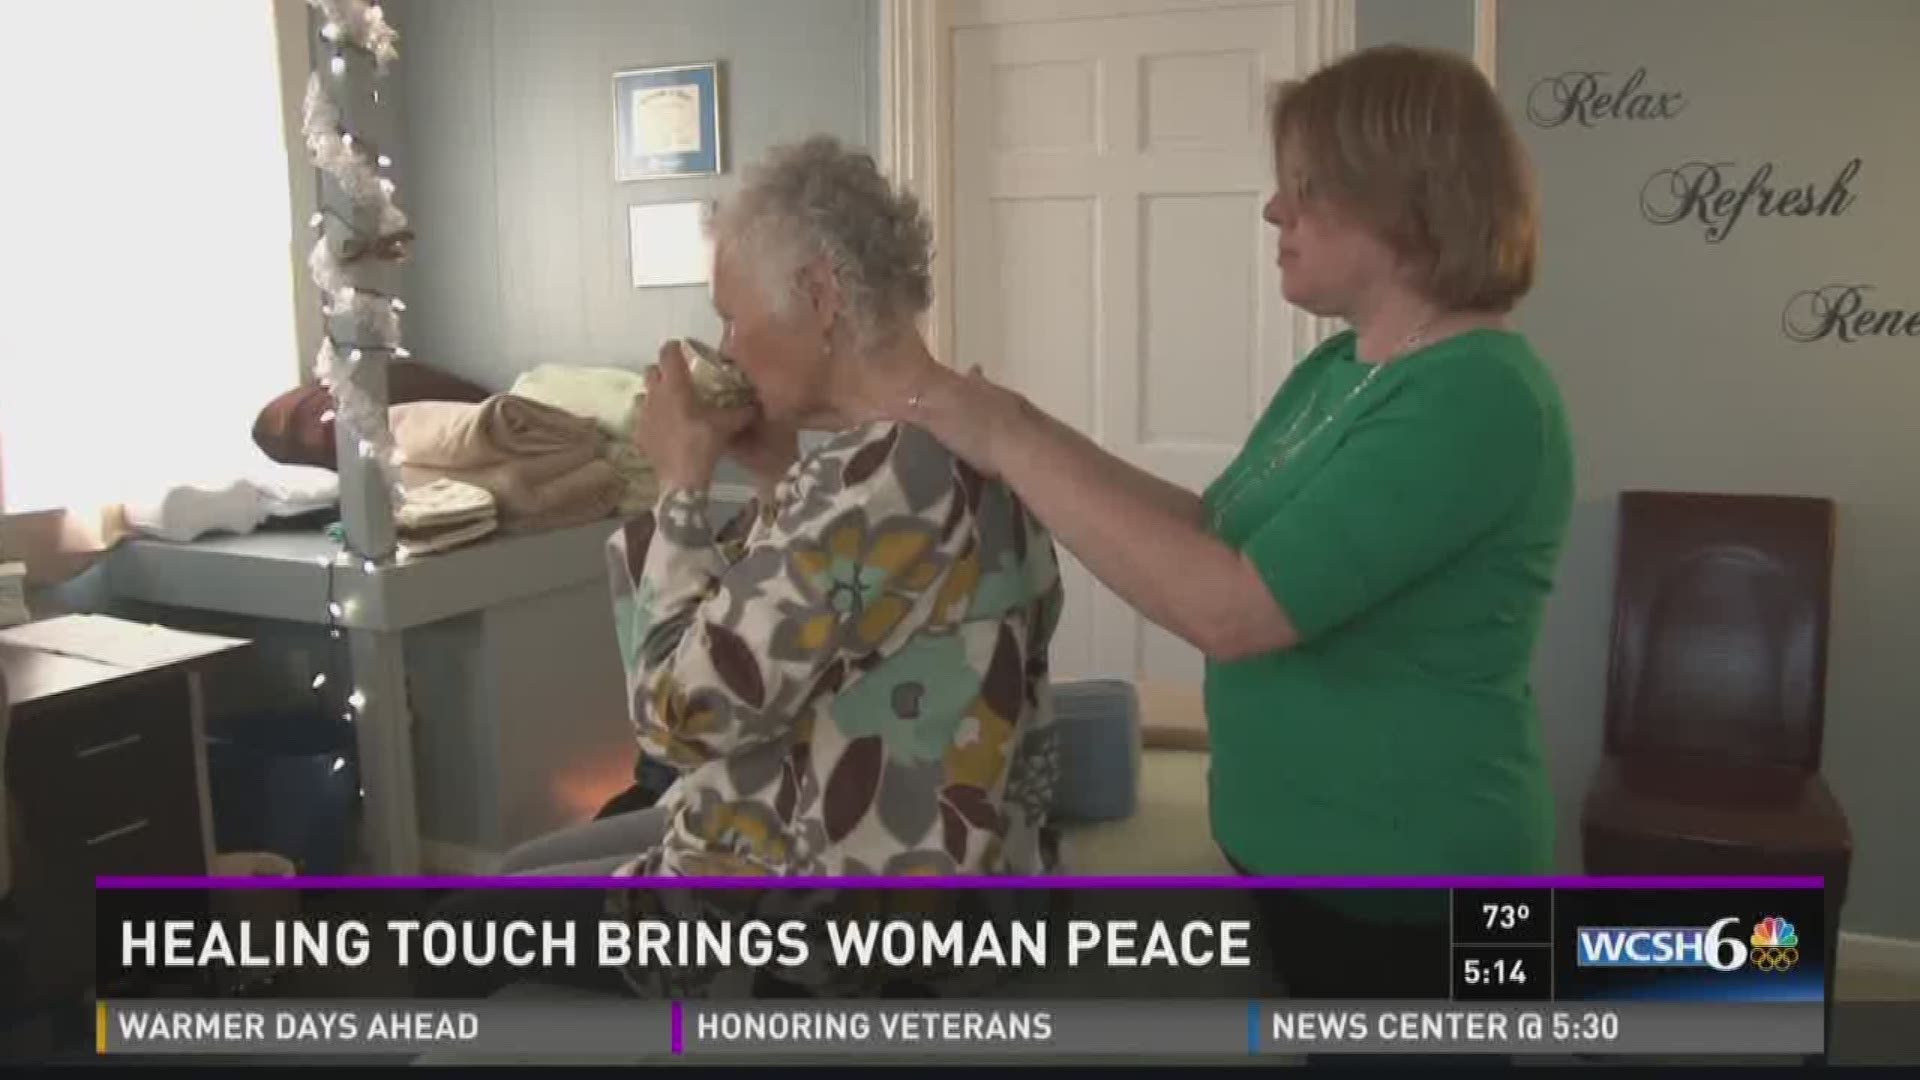 Healing touch brings woman peace